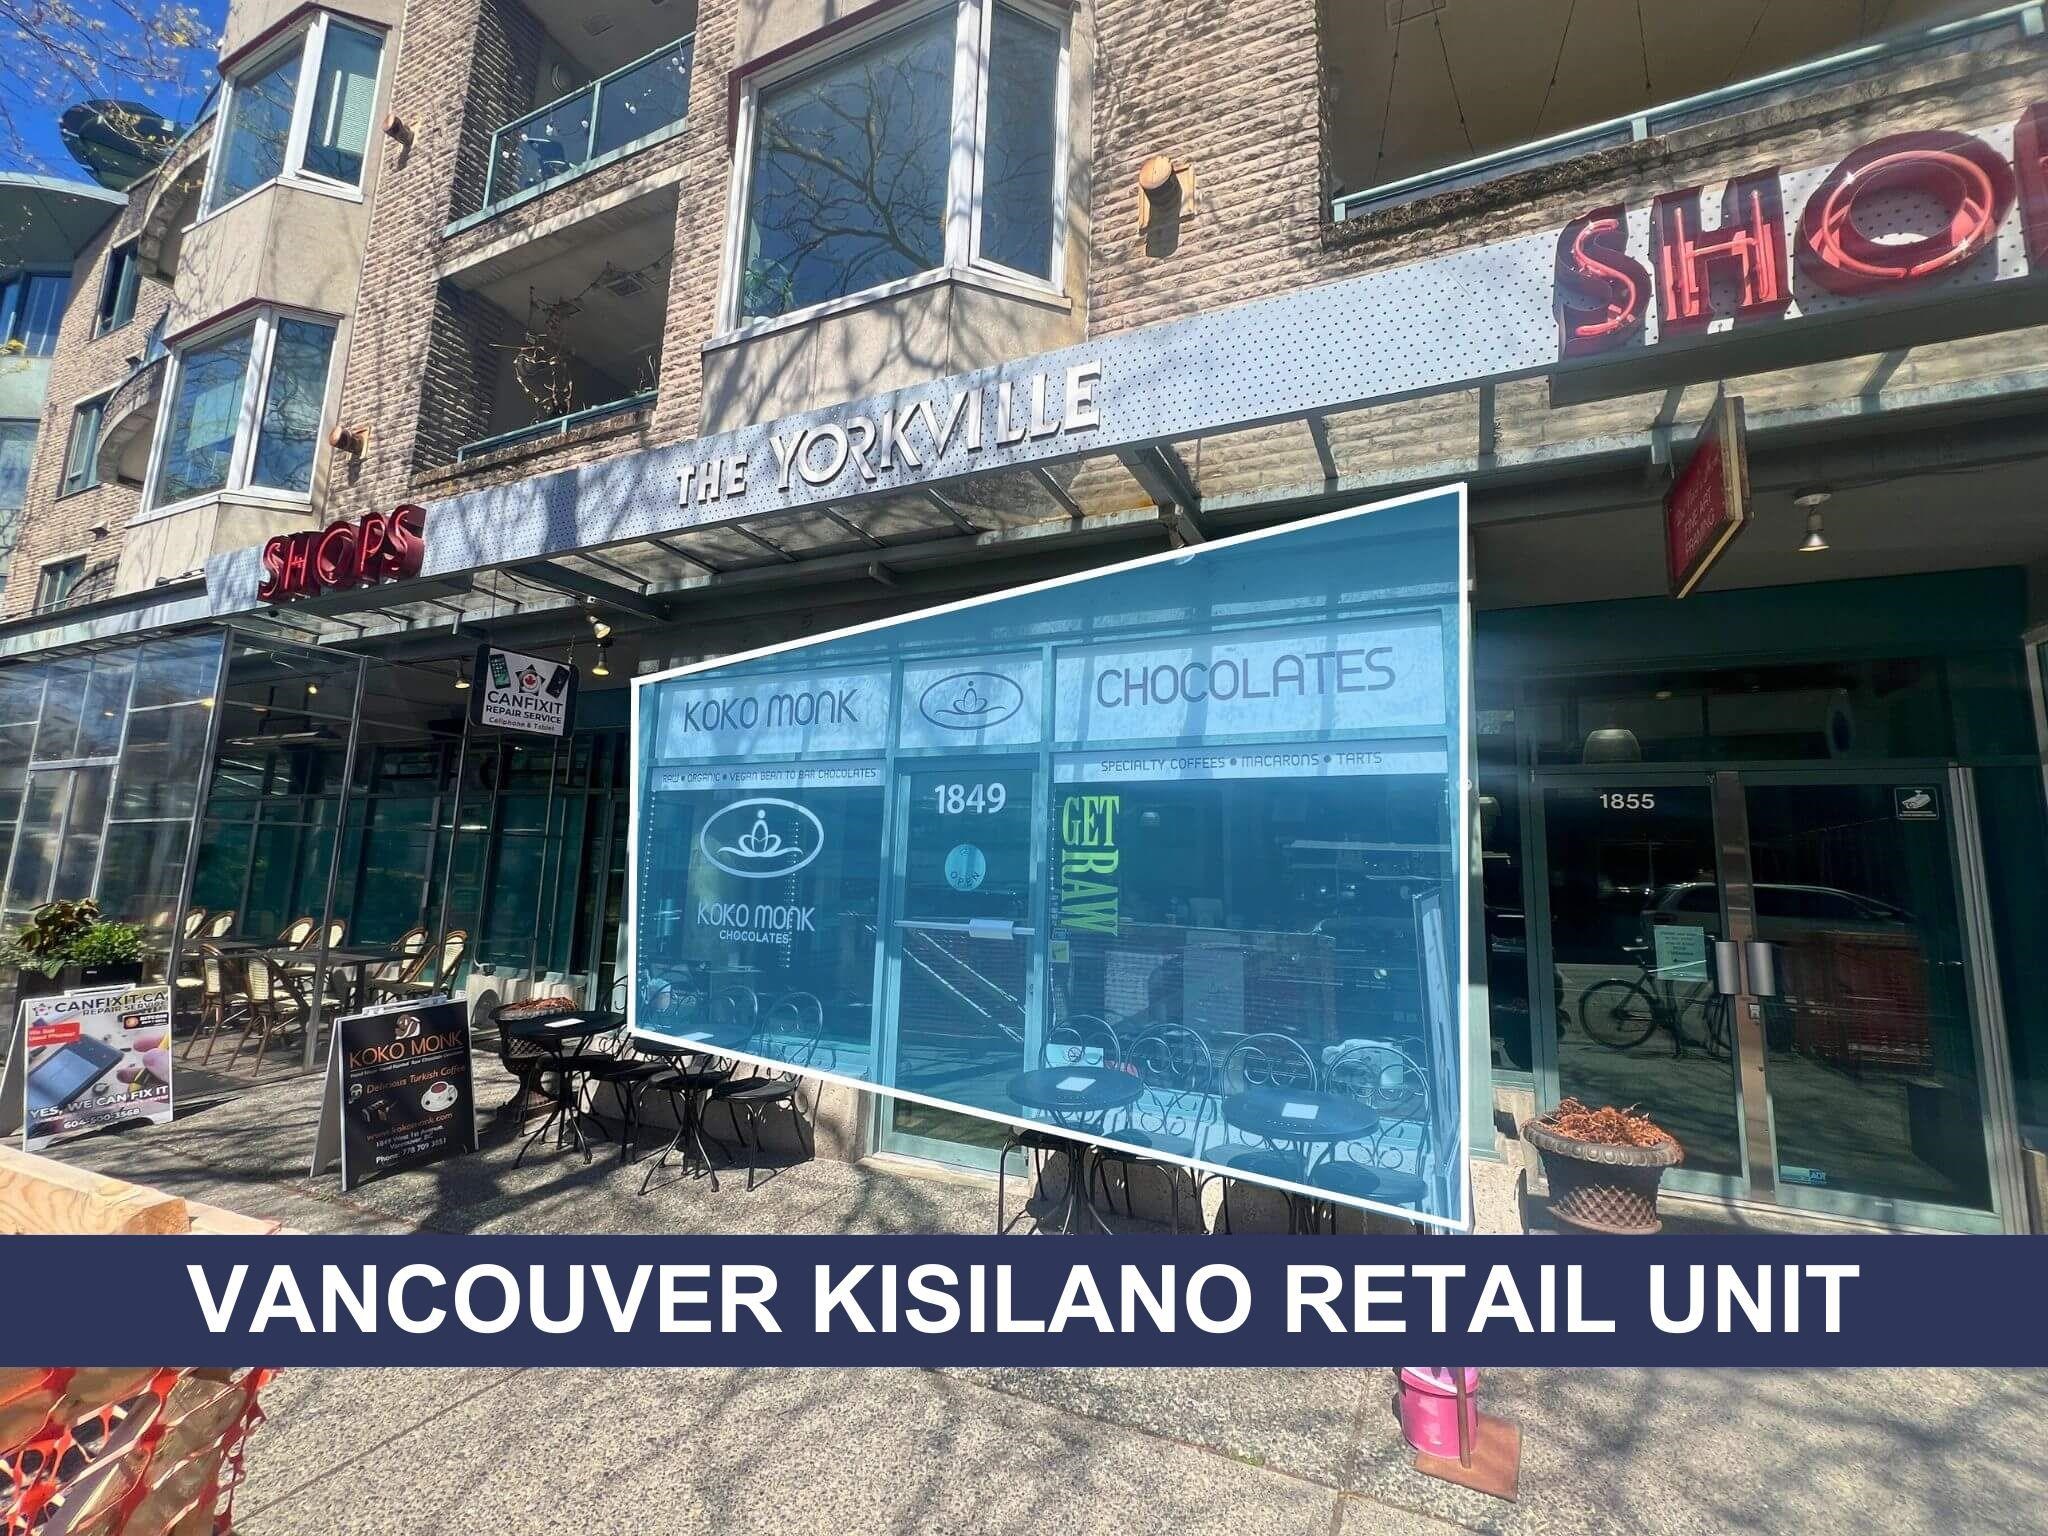 Kitsilano Land Commercial for sale:    (Listed 6800-05-06)